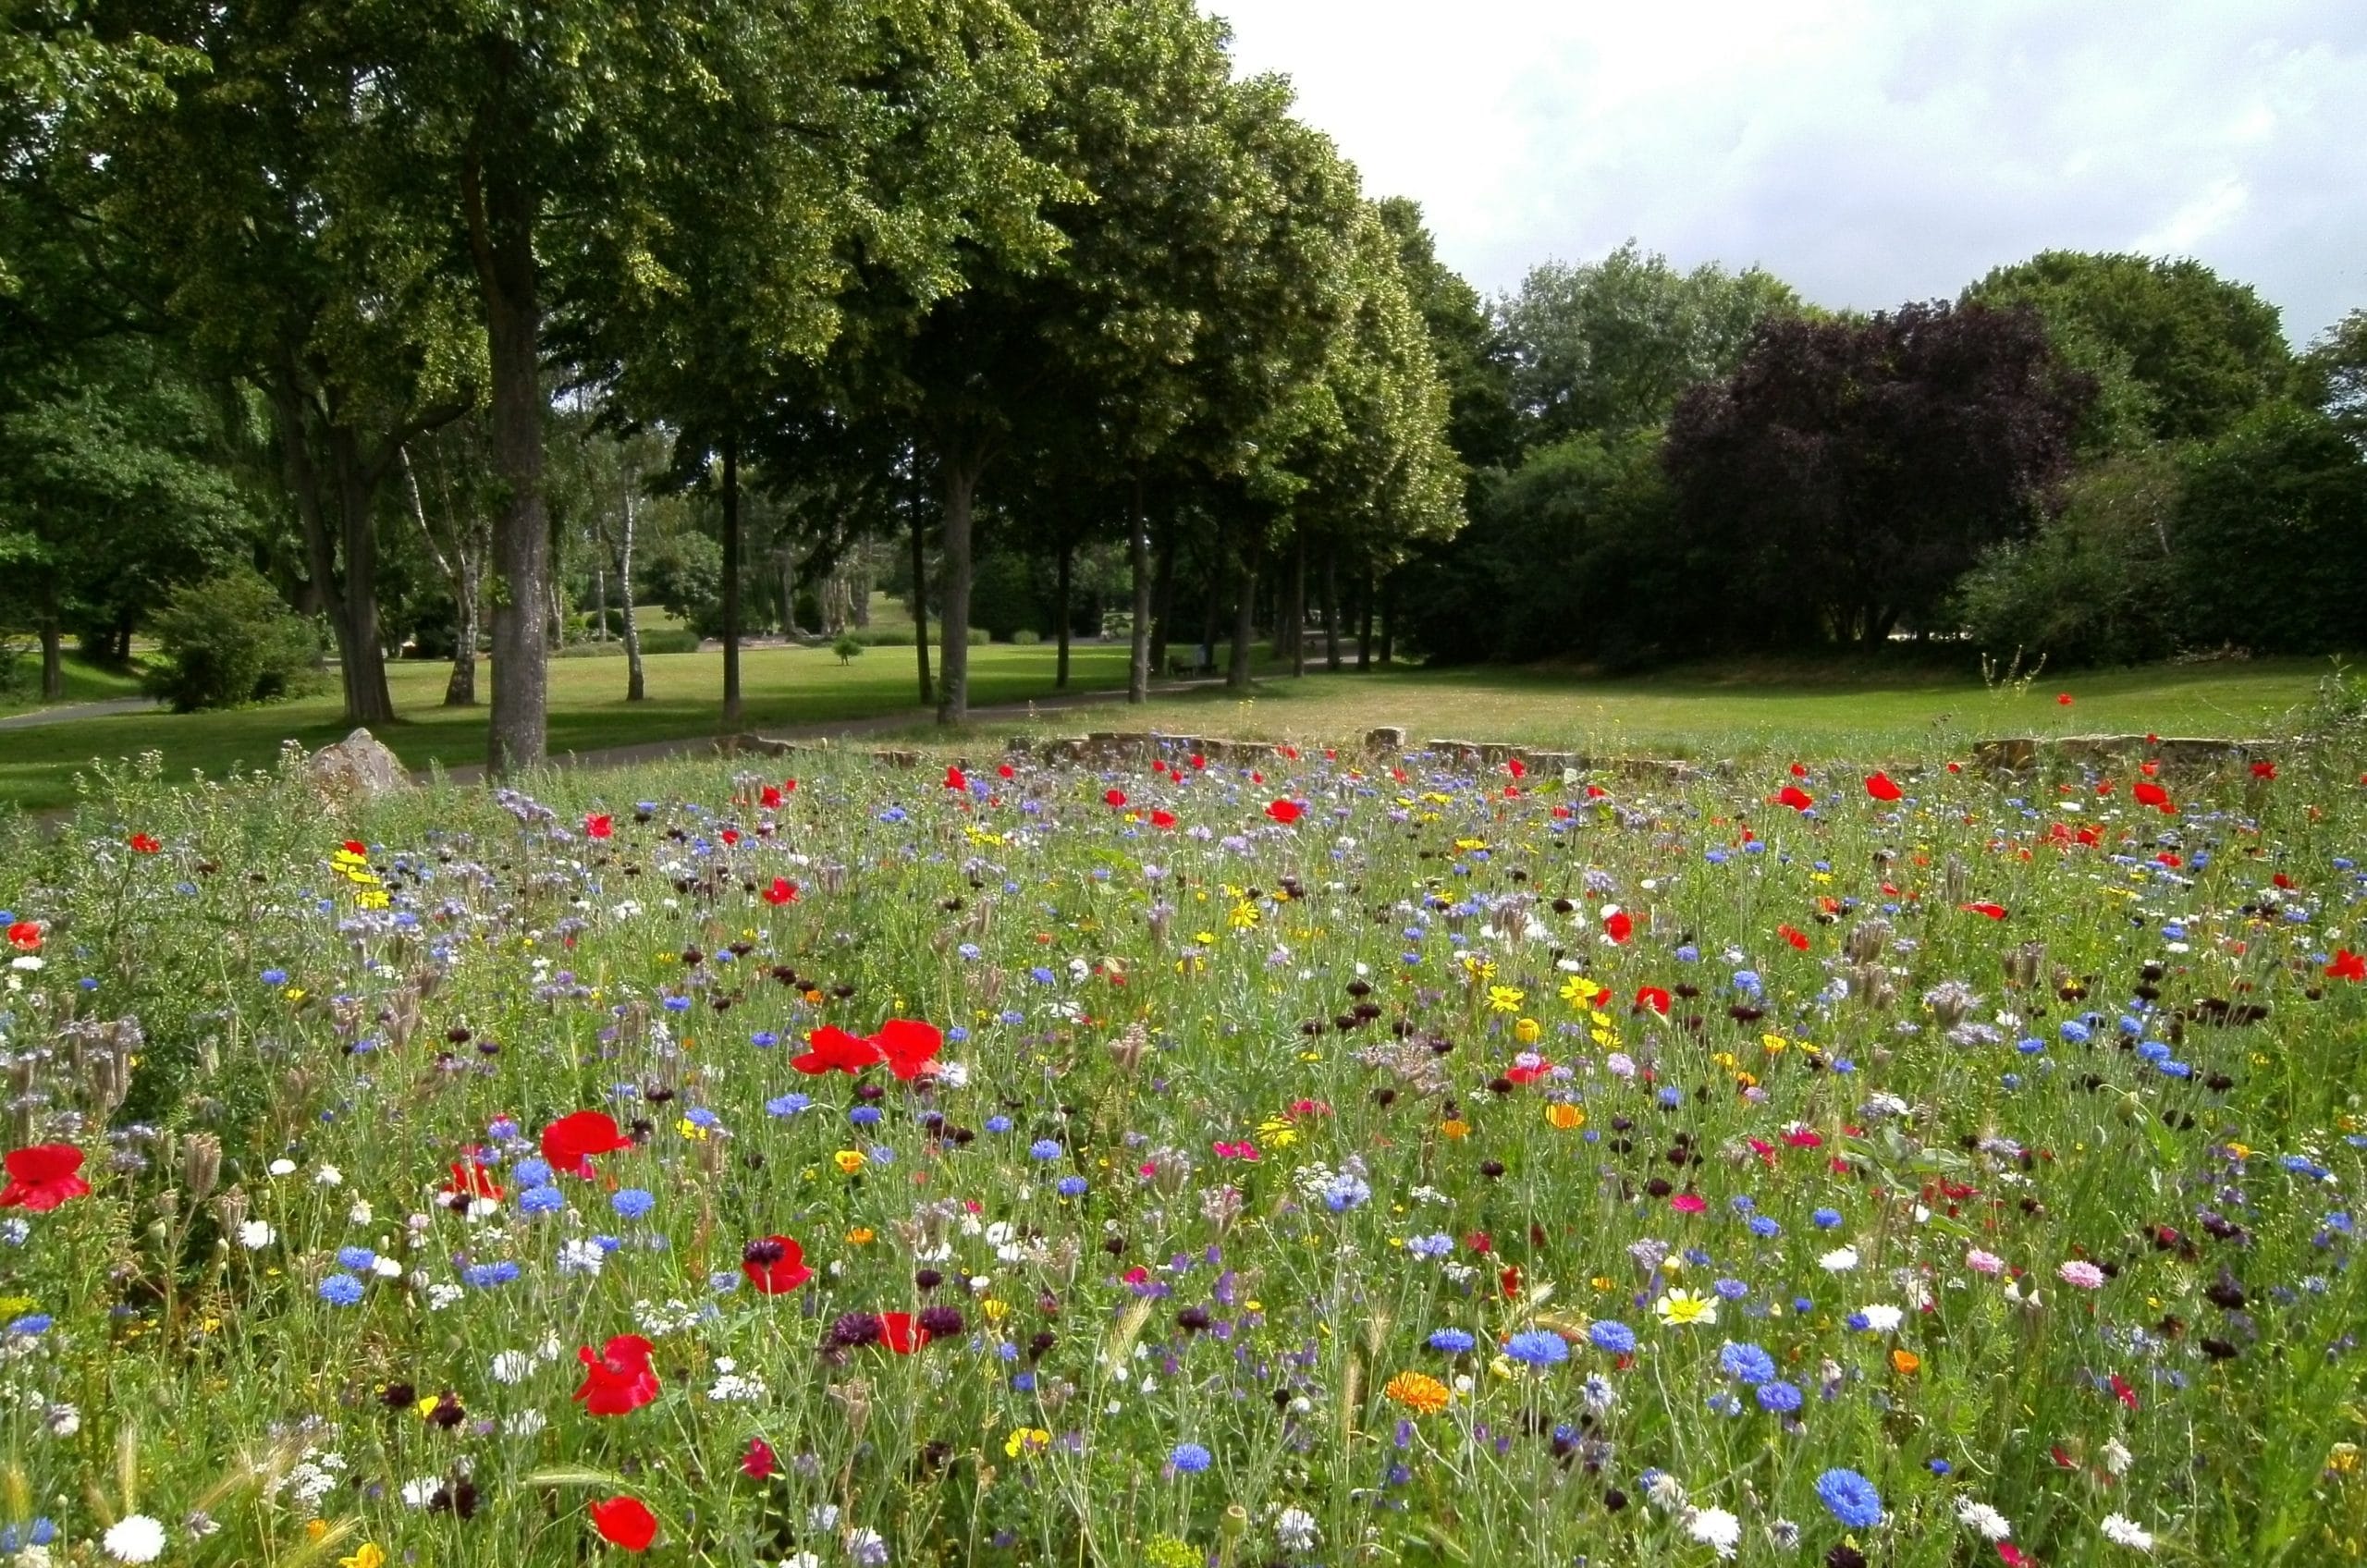 A photograph of a park with large trees in the background and a bed of different flowers in the foreground